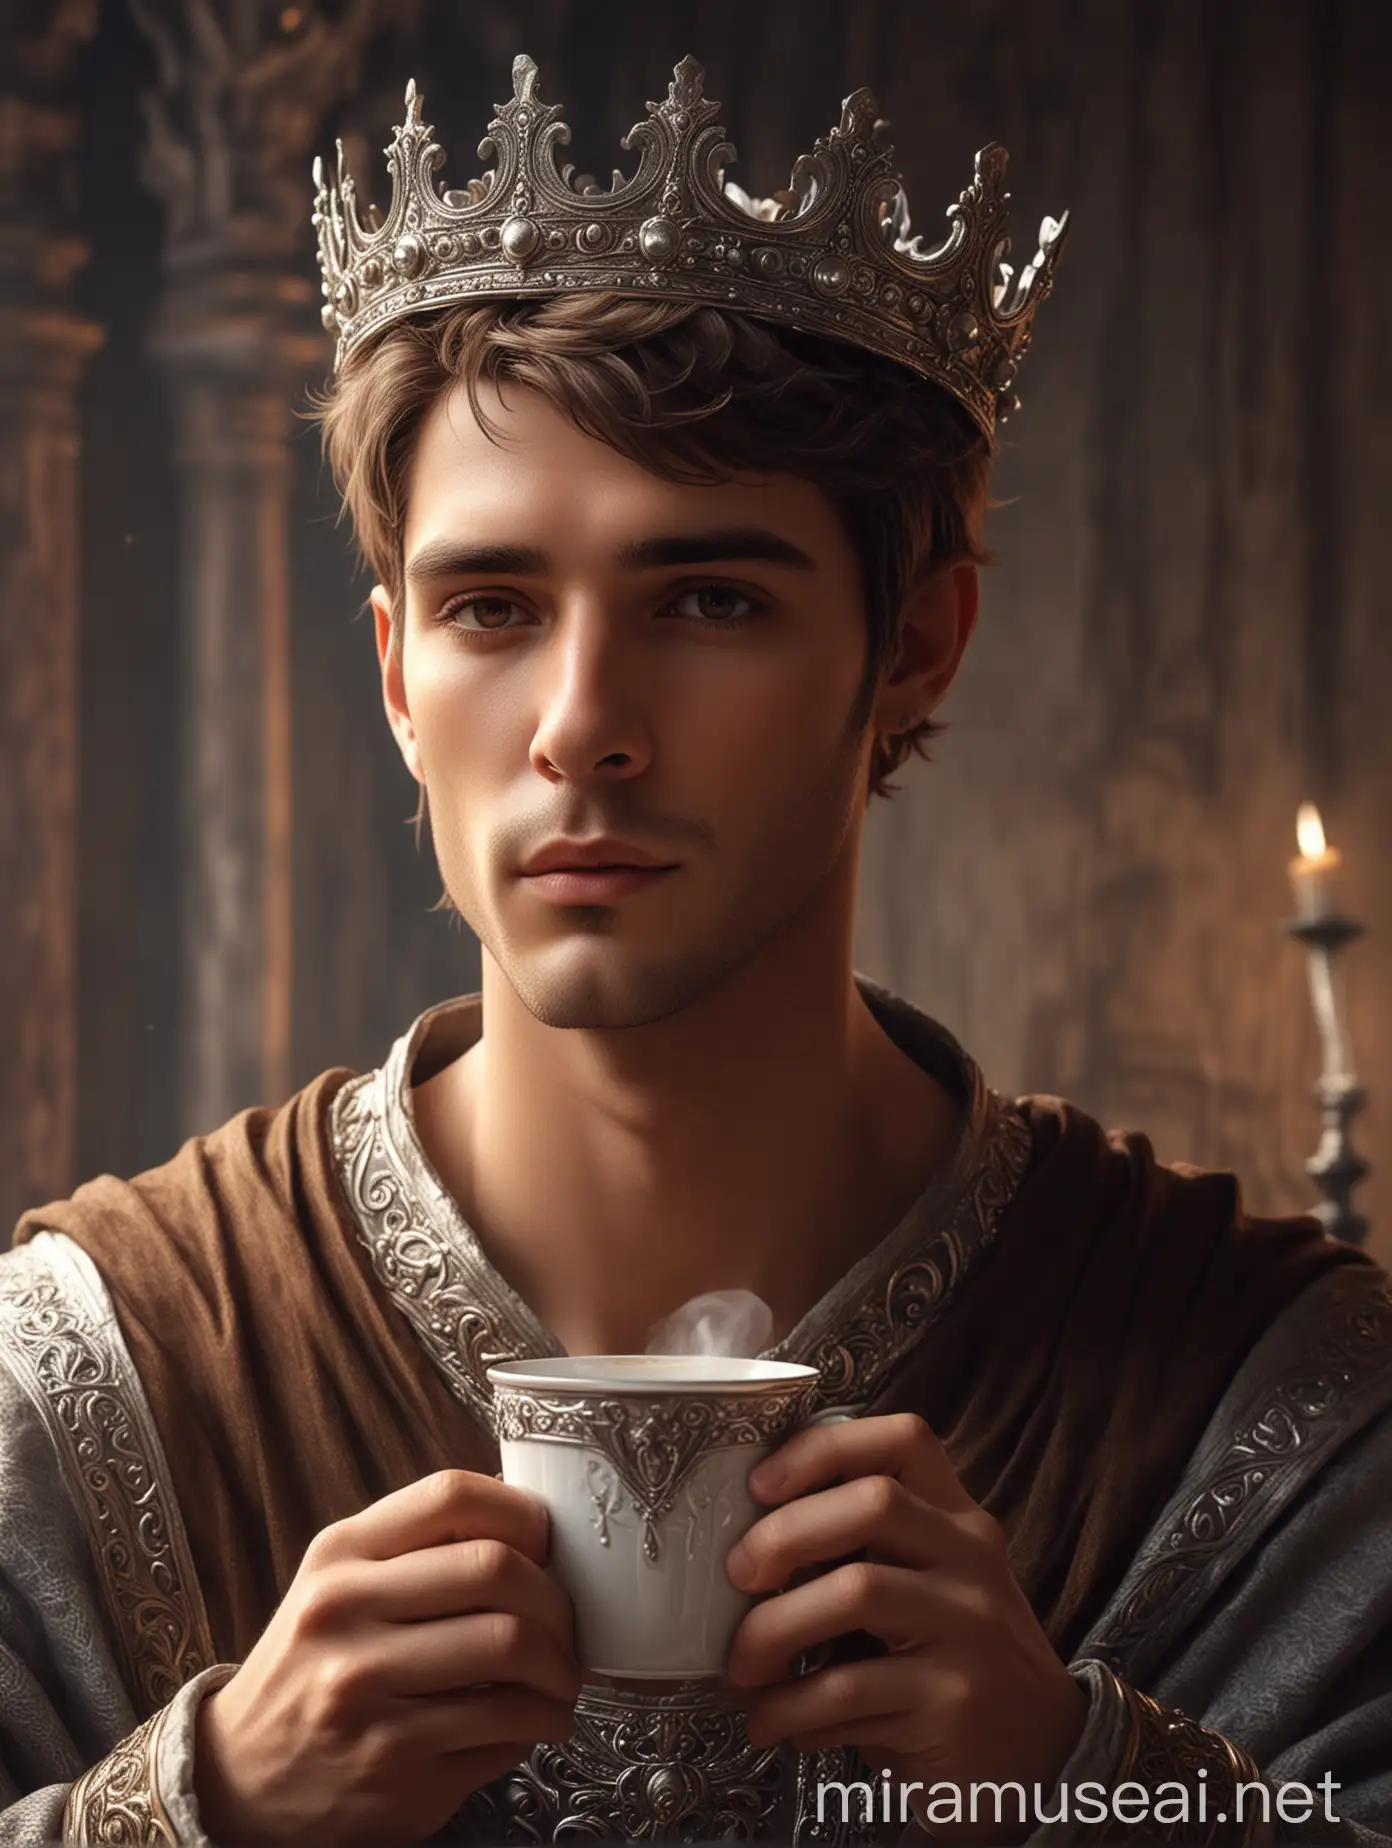 Handsome King with Silver Crown Drinking Coffee in Digital Art Style